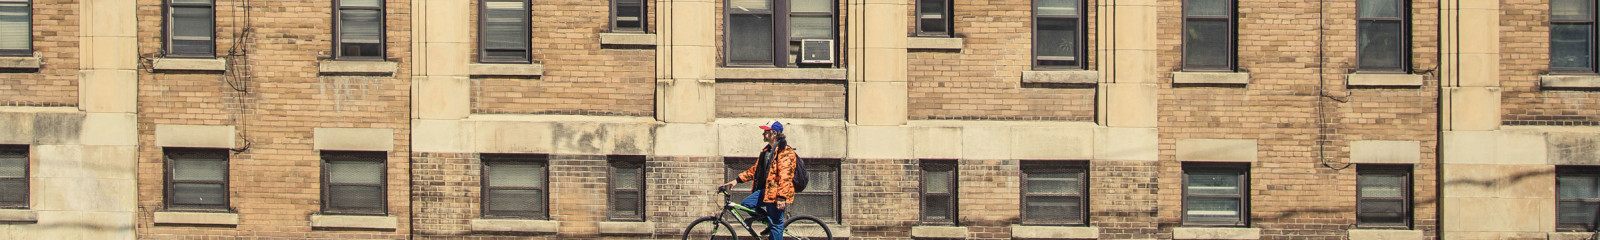 man on bike in front of an old brick apartment building